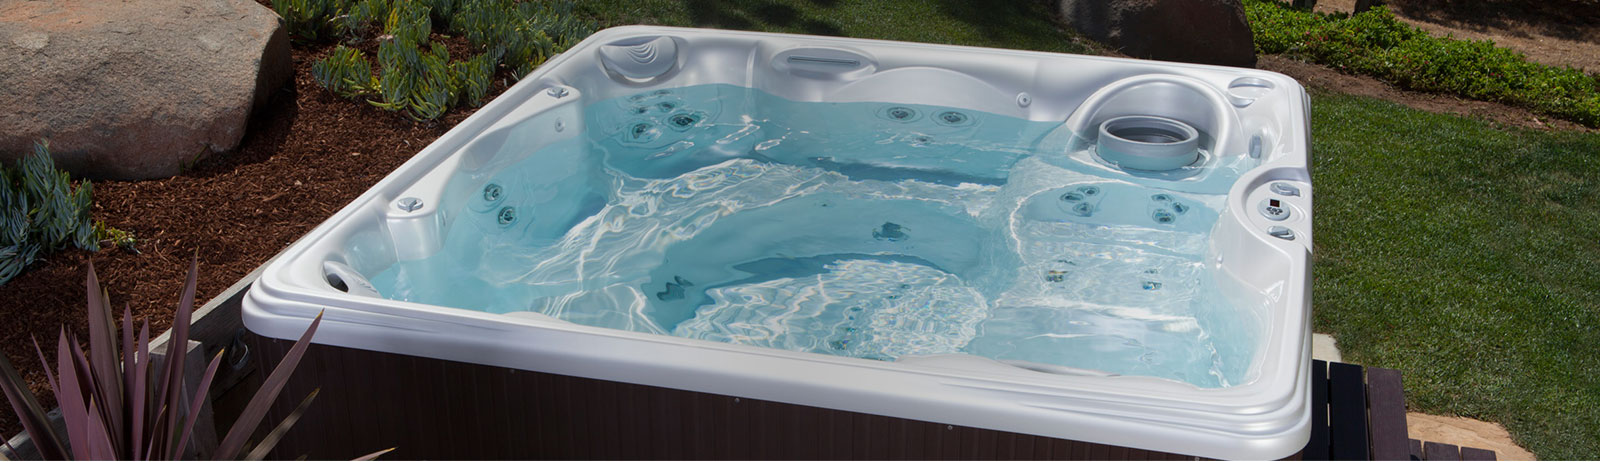 How to Buy a Hot Tub